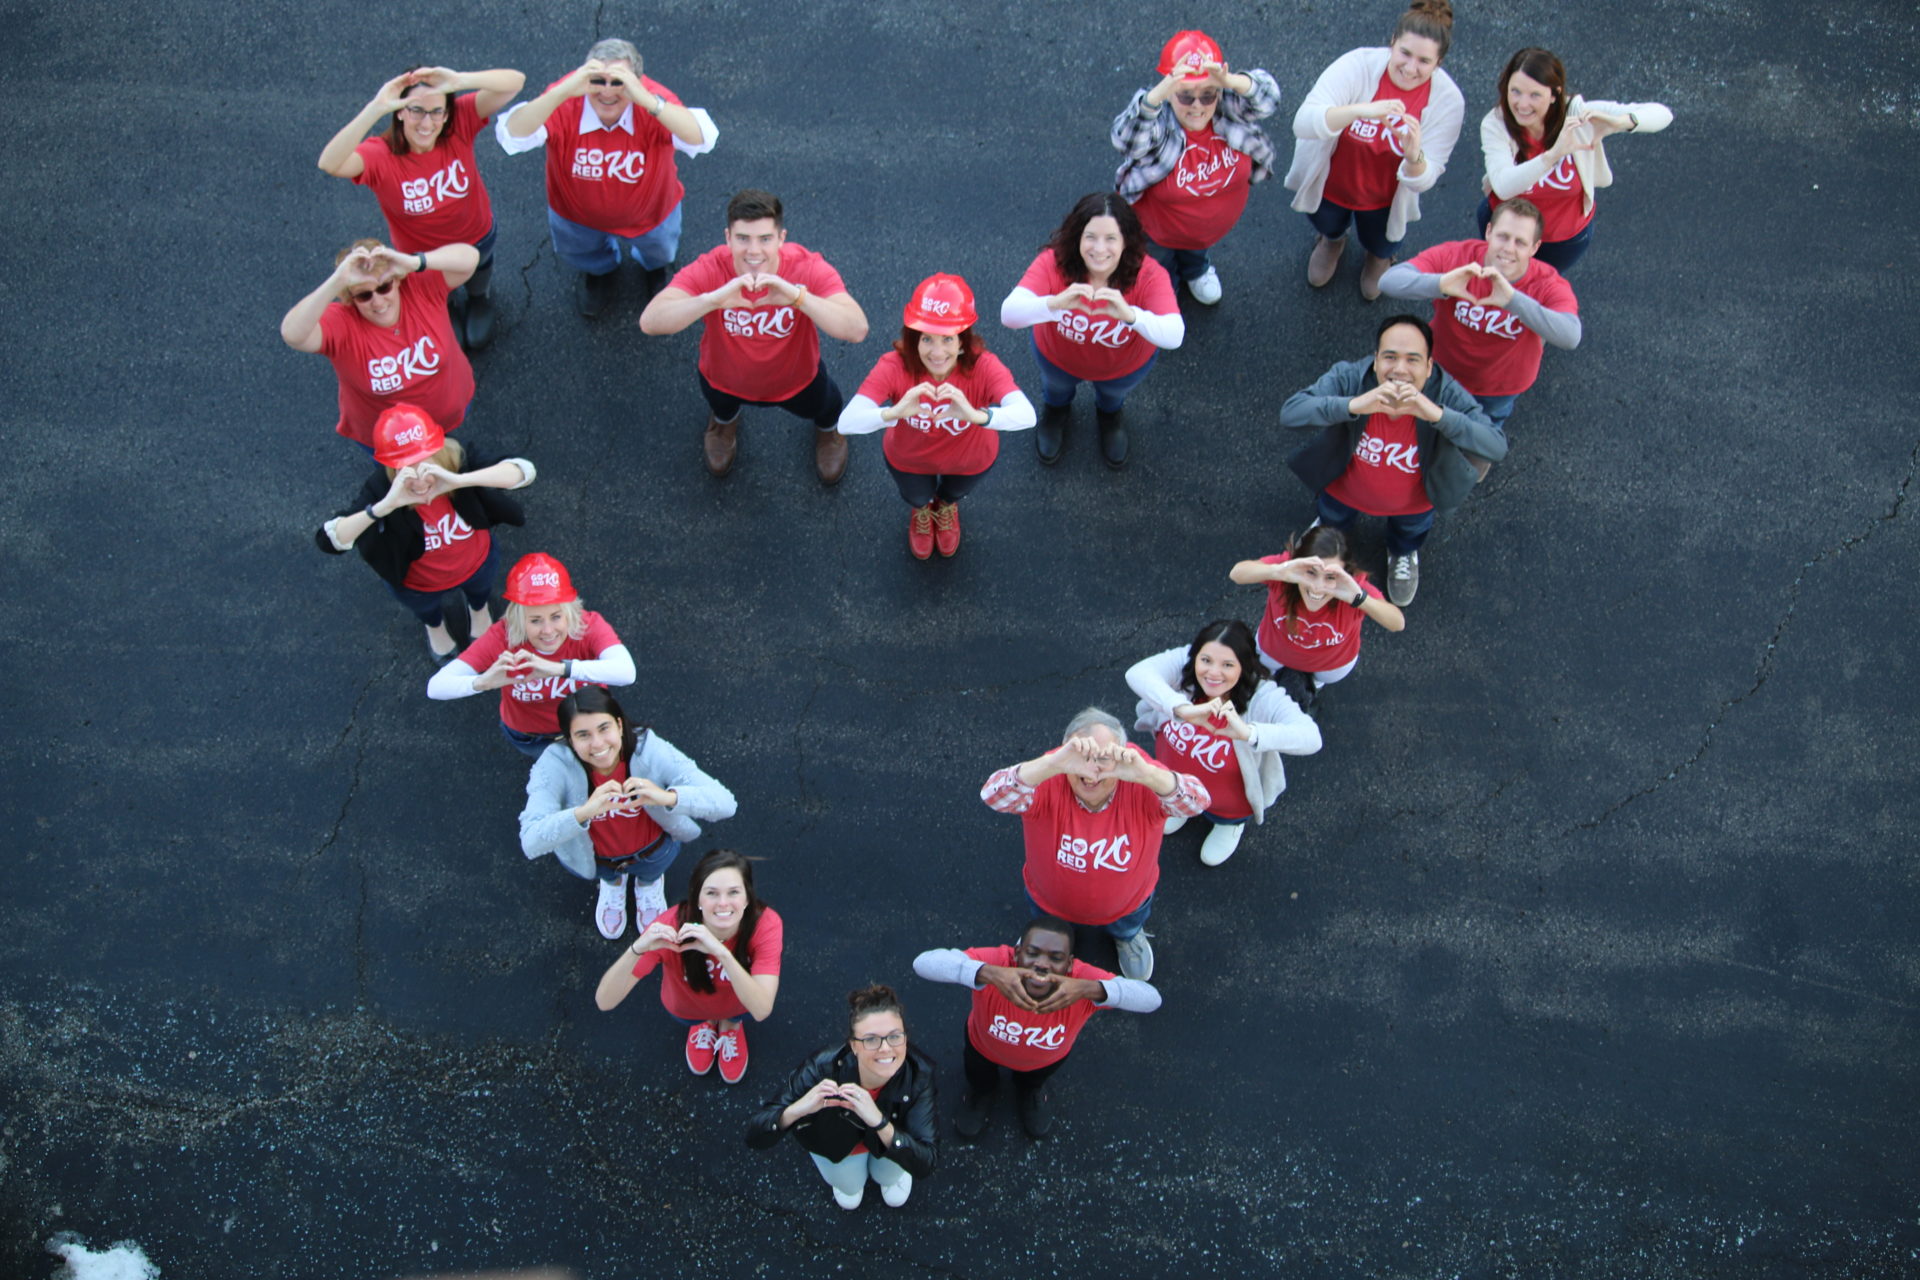 McCownGordon supports AHA Kansas City through Go Red initiatives throughout the month of February.